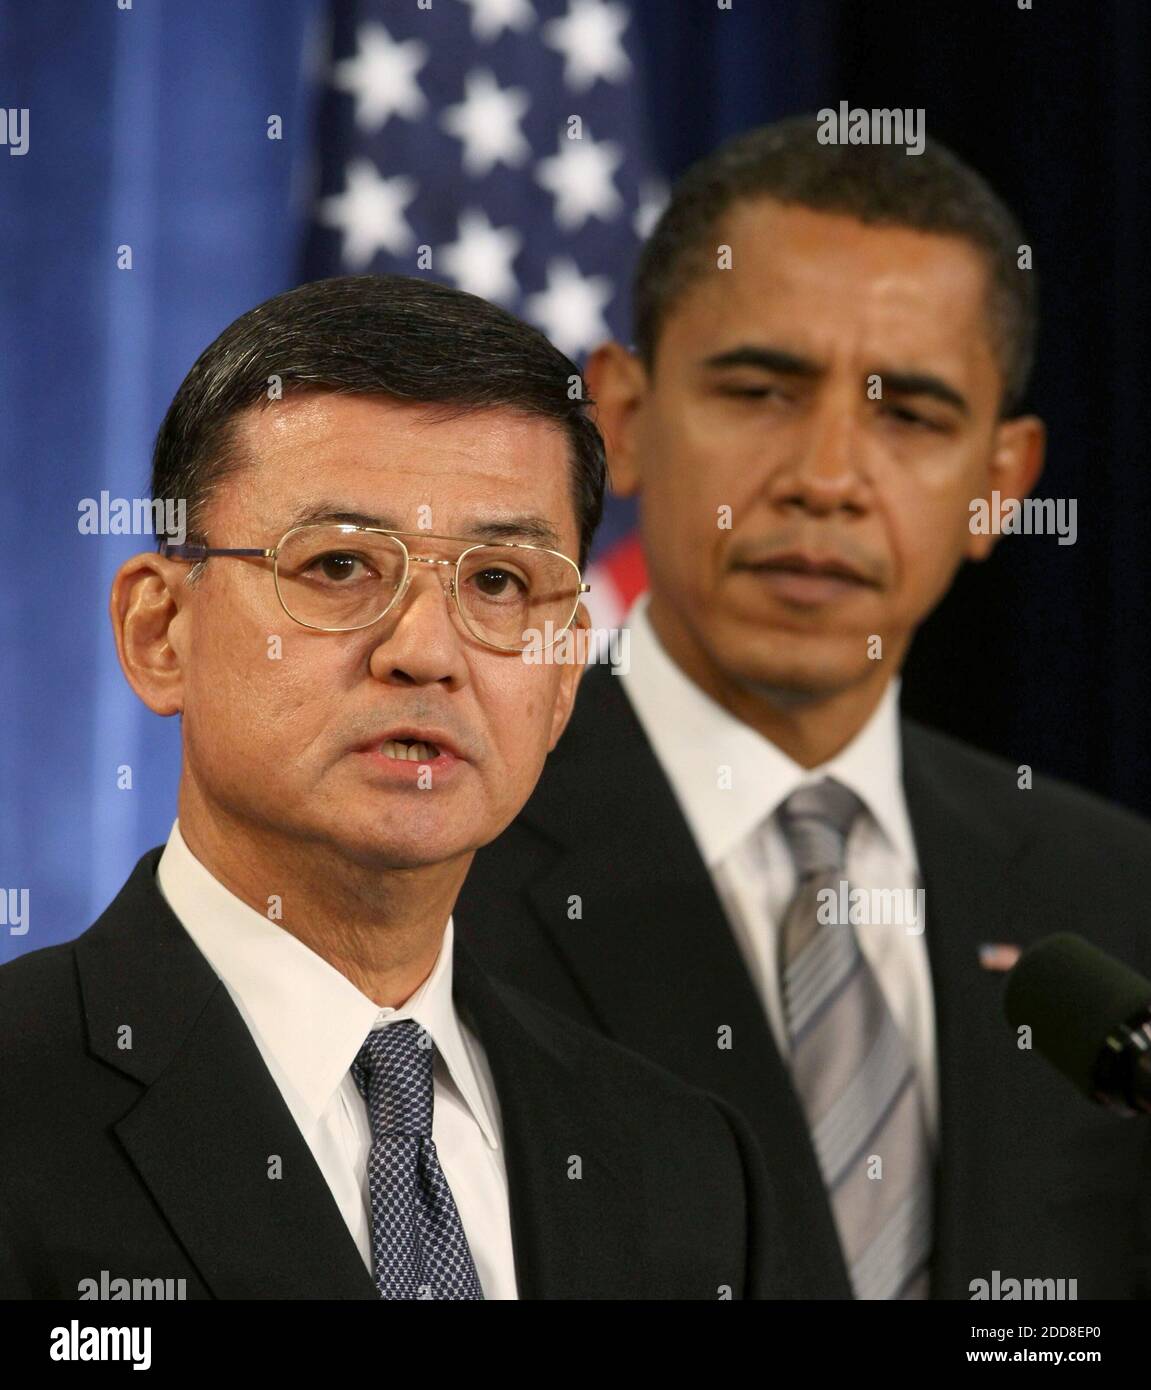 NO FILM, NO VIDEO, NO TV, NO DOCUMENTARY - Gen. Eric Ken Shinseki (L) is named by U.S. President-elect Barack Obama (R) to become the next United States Secretary of Veterans Affairs during a press conference at the Hilton in downtown Chicago, Illinois, USA on Sunday, December 7, 2008. Photo by Terrence Antonio James/Chicago Tribune/MCT/ABACAPRESS.COM Stock Photo